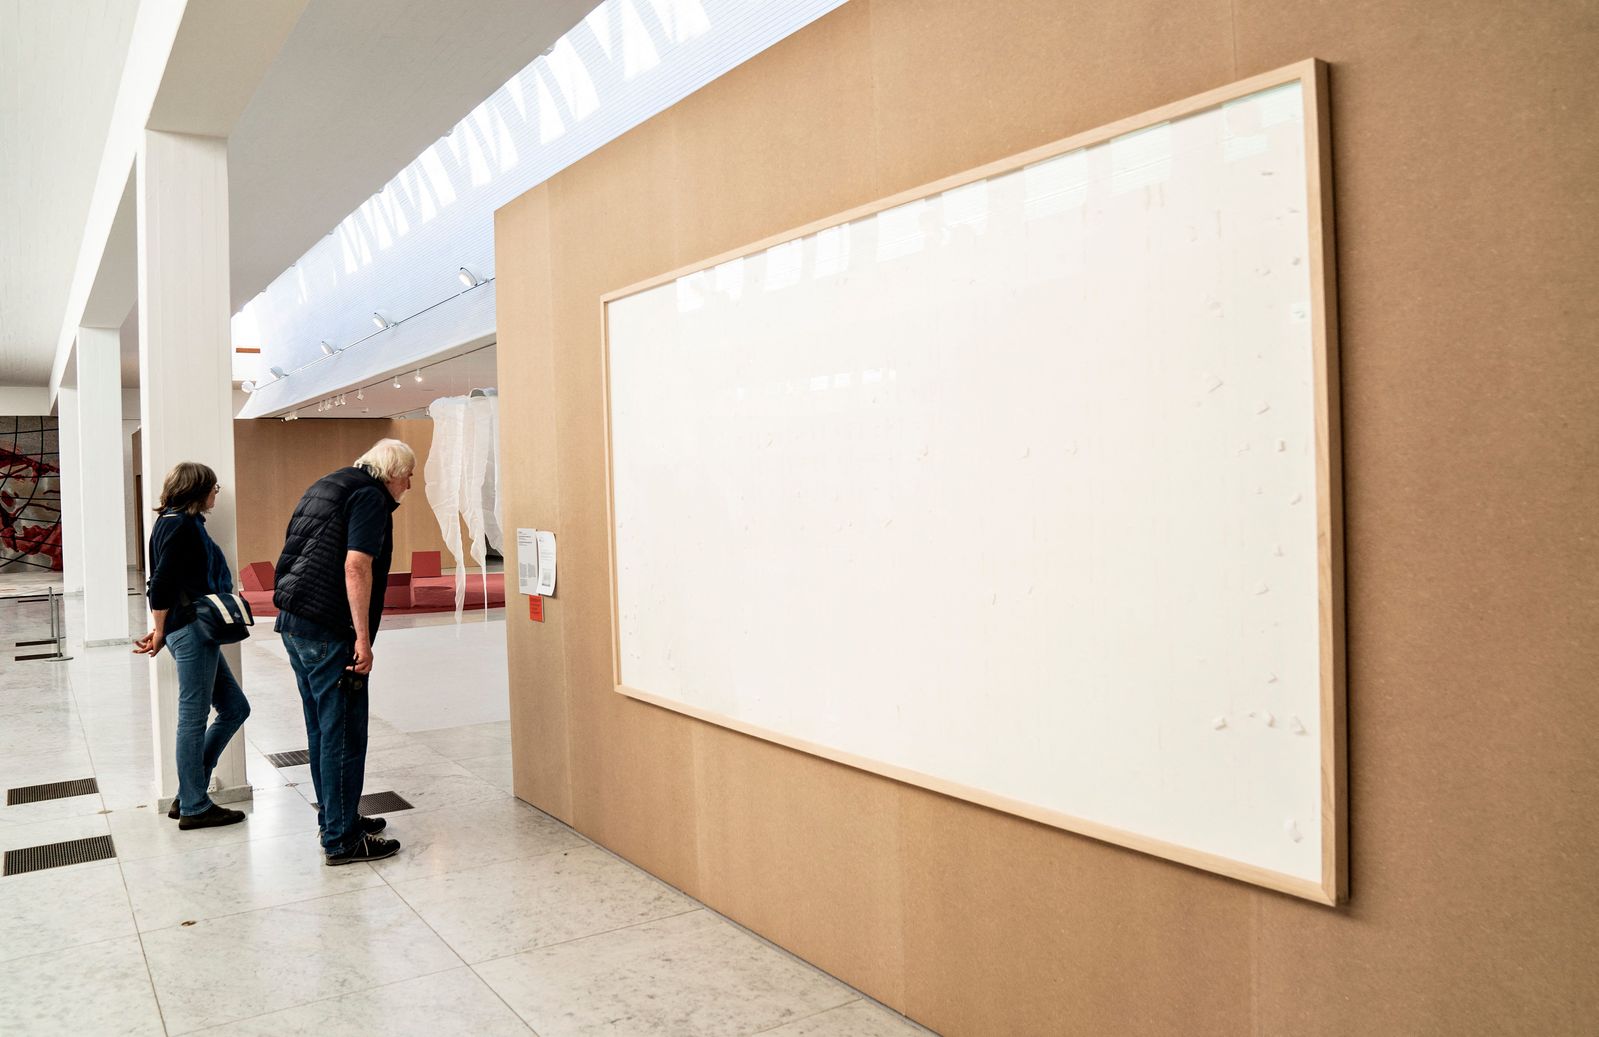 Artist Who Submitted Empty Canvases to Danish Museum Must Repay $70,000